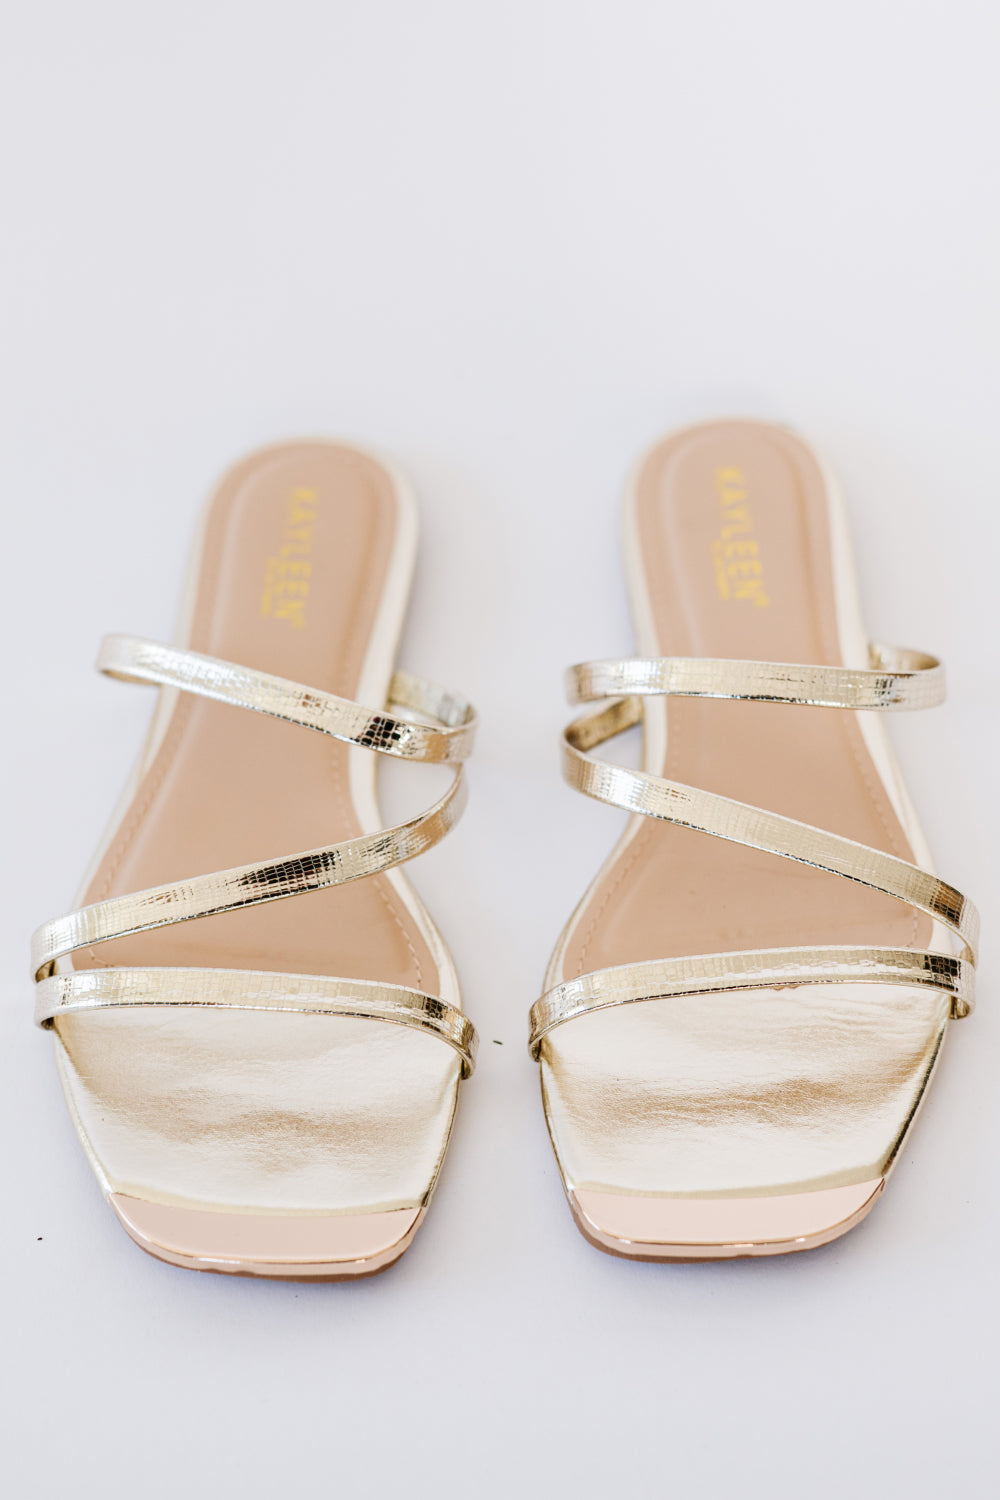 KAYLEEN Epiphanous Moment Strappy Slide Sandals